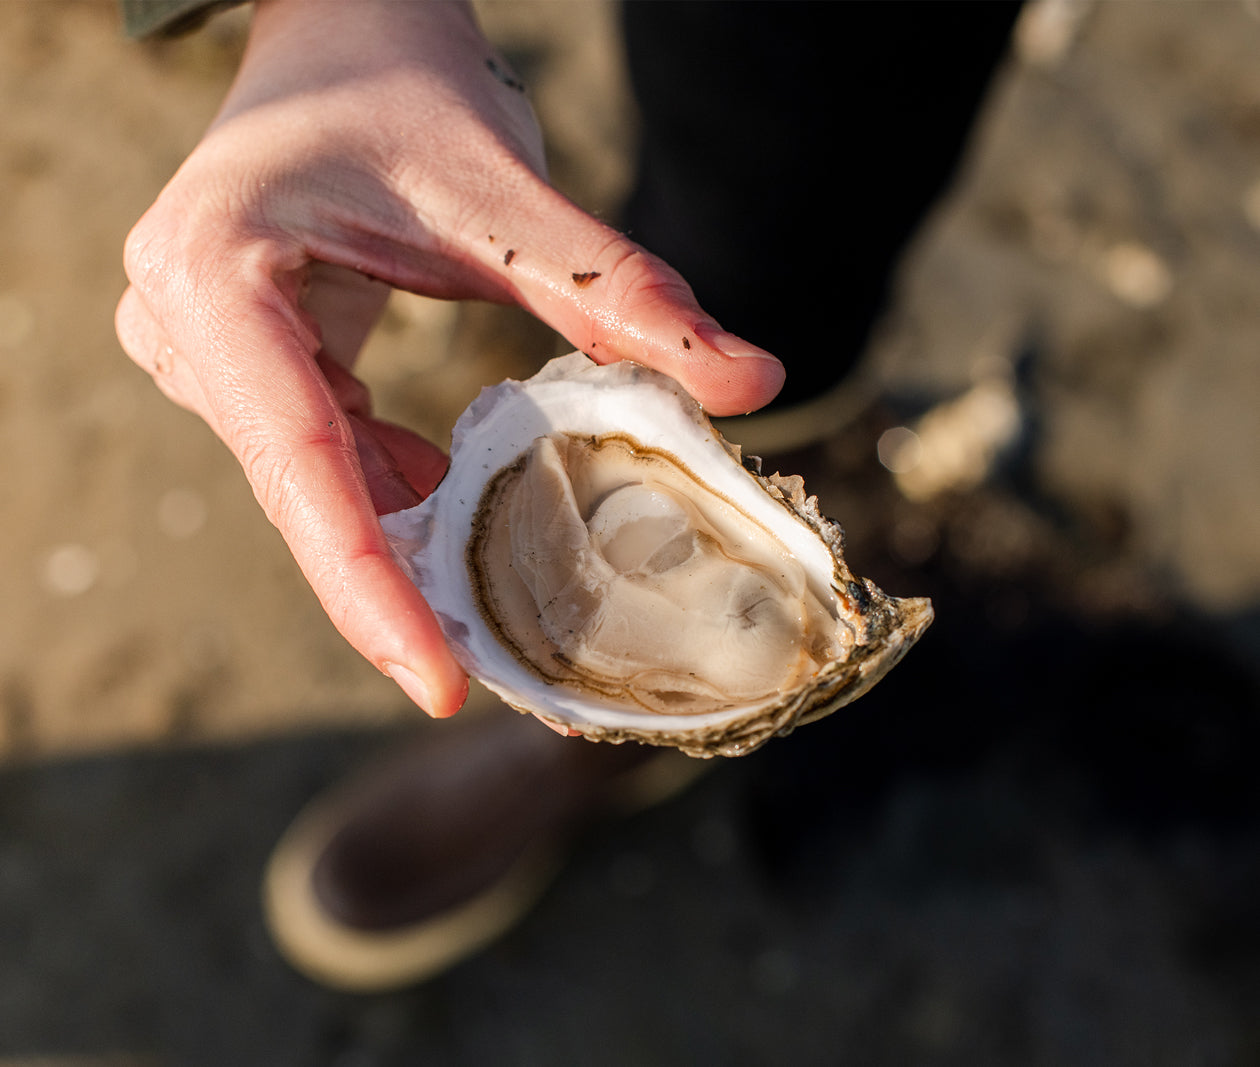 Moon Shoal Oysters from Barnstable, MA